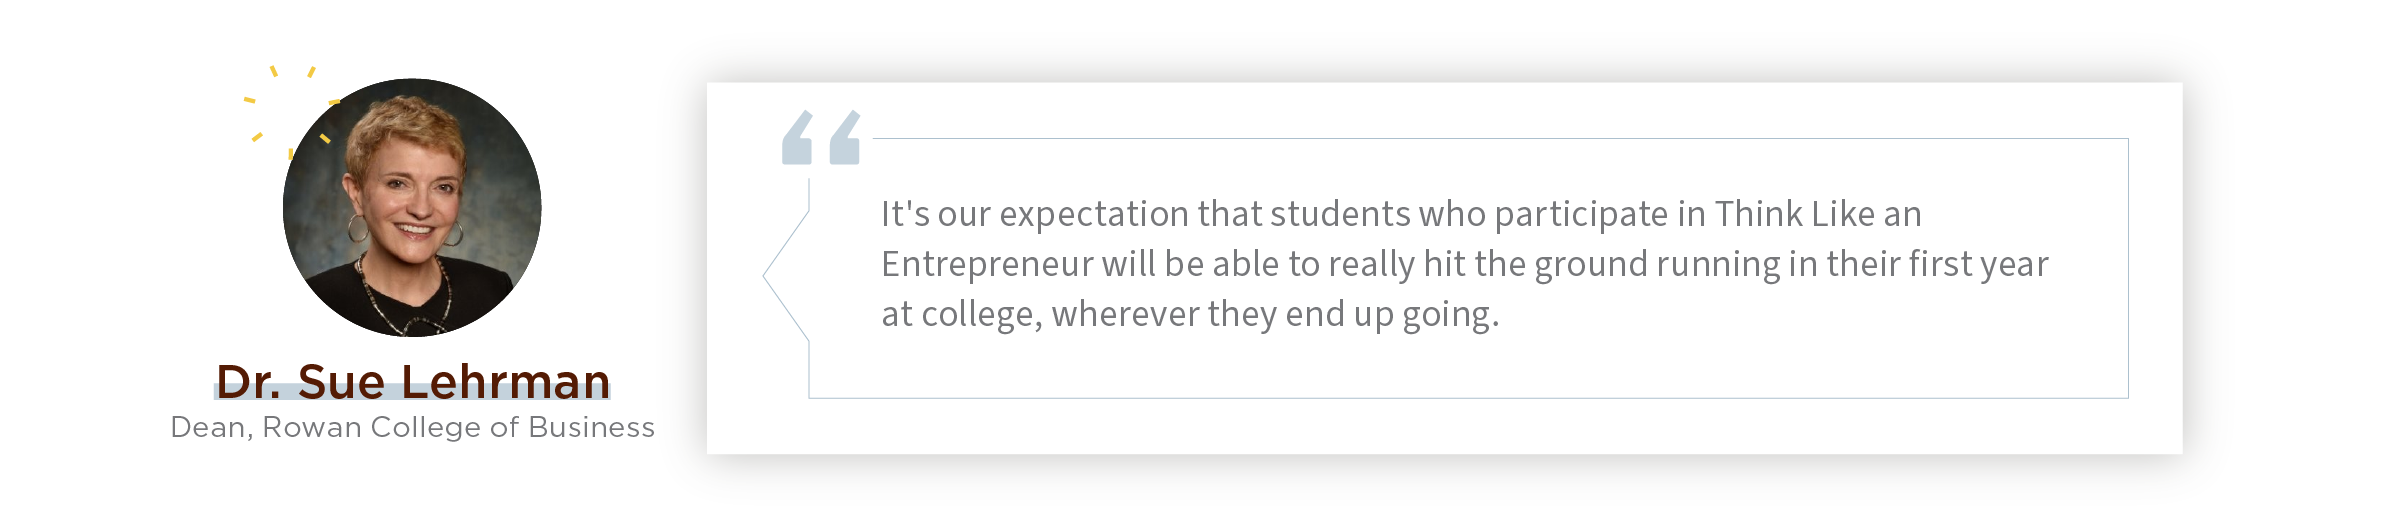 Quote:  "It's our expectation that students who participate in Think Like an Entrepreneur will be able to really hit the ground running in their first year at college, wherever they end up going."    - Rohrer College of Business Dean Dr. Sue Lehrman